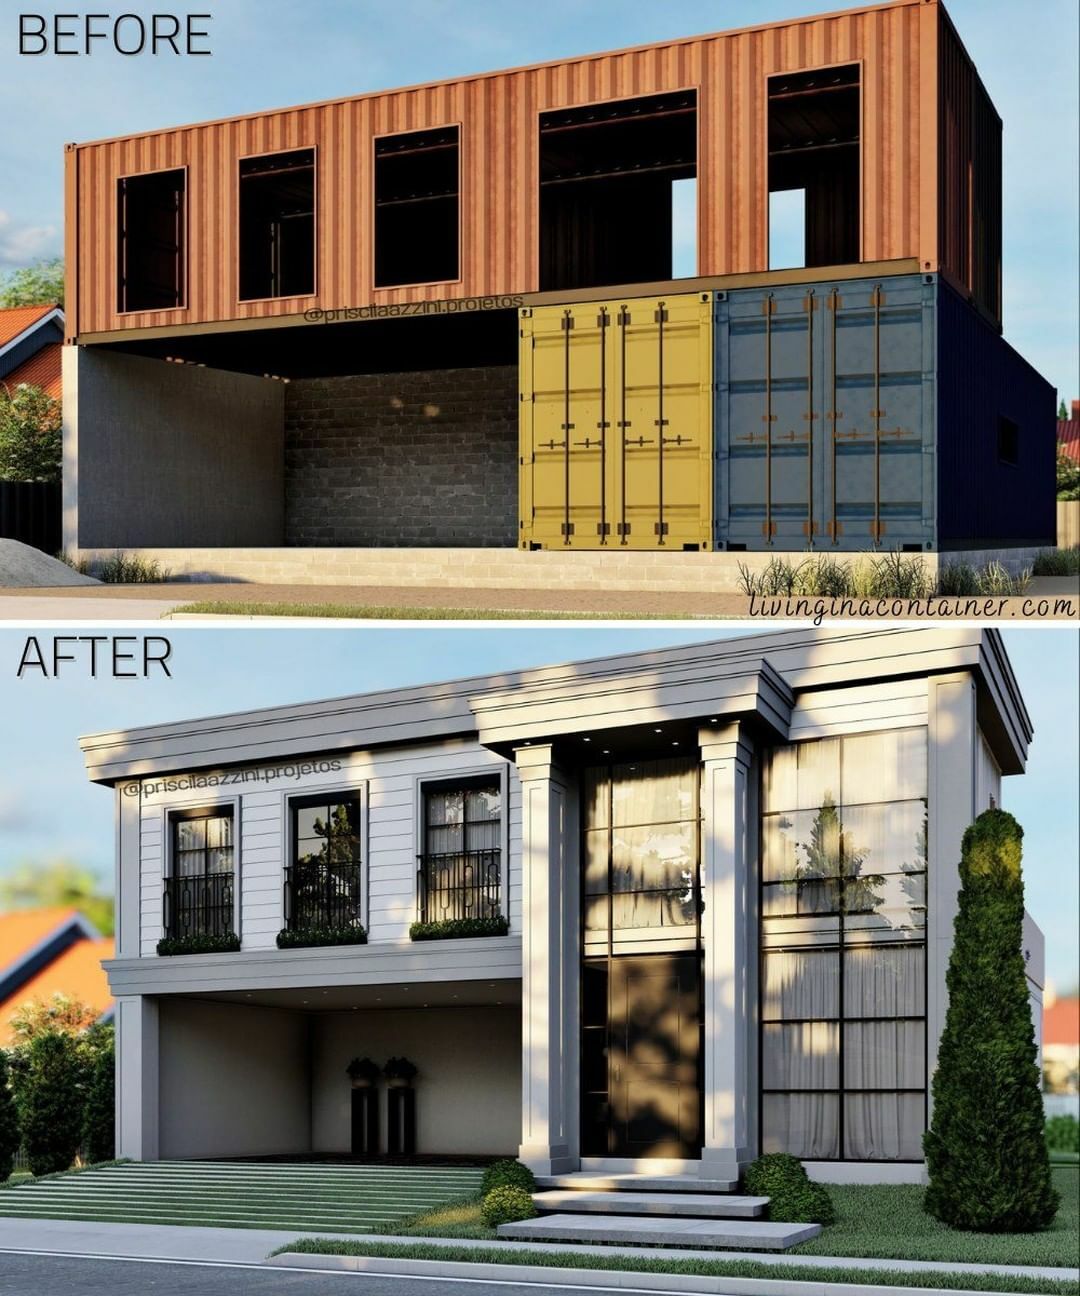 Houses-From-Recycled-Shipping-Containers